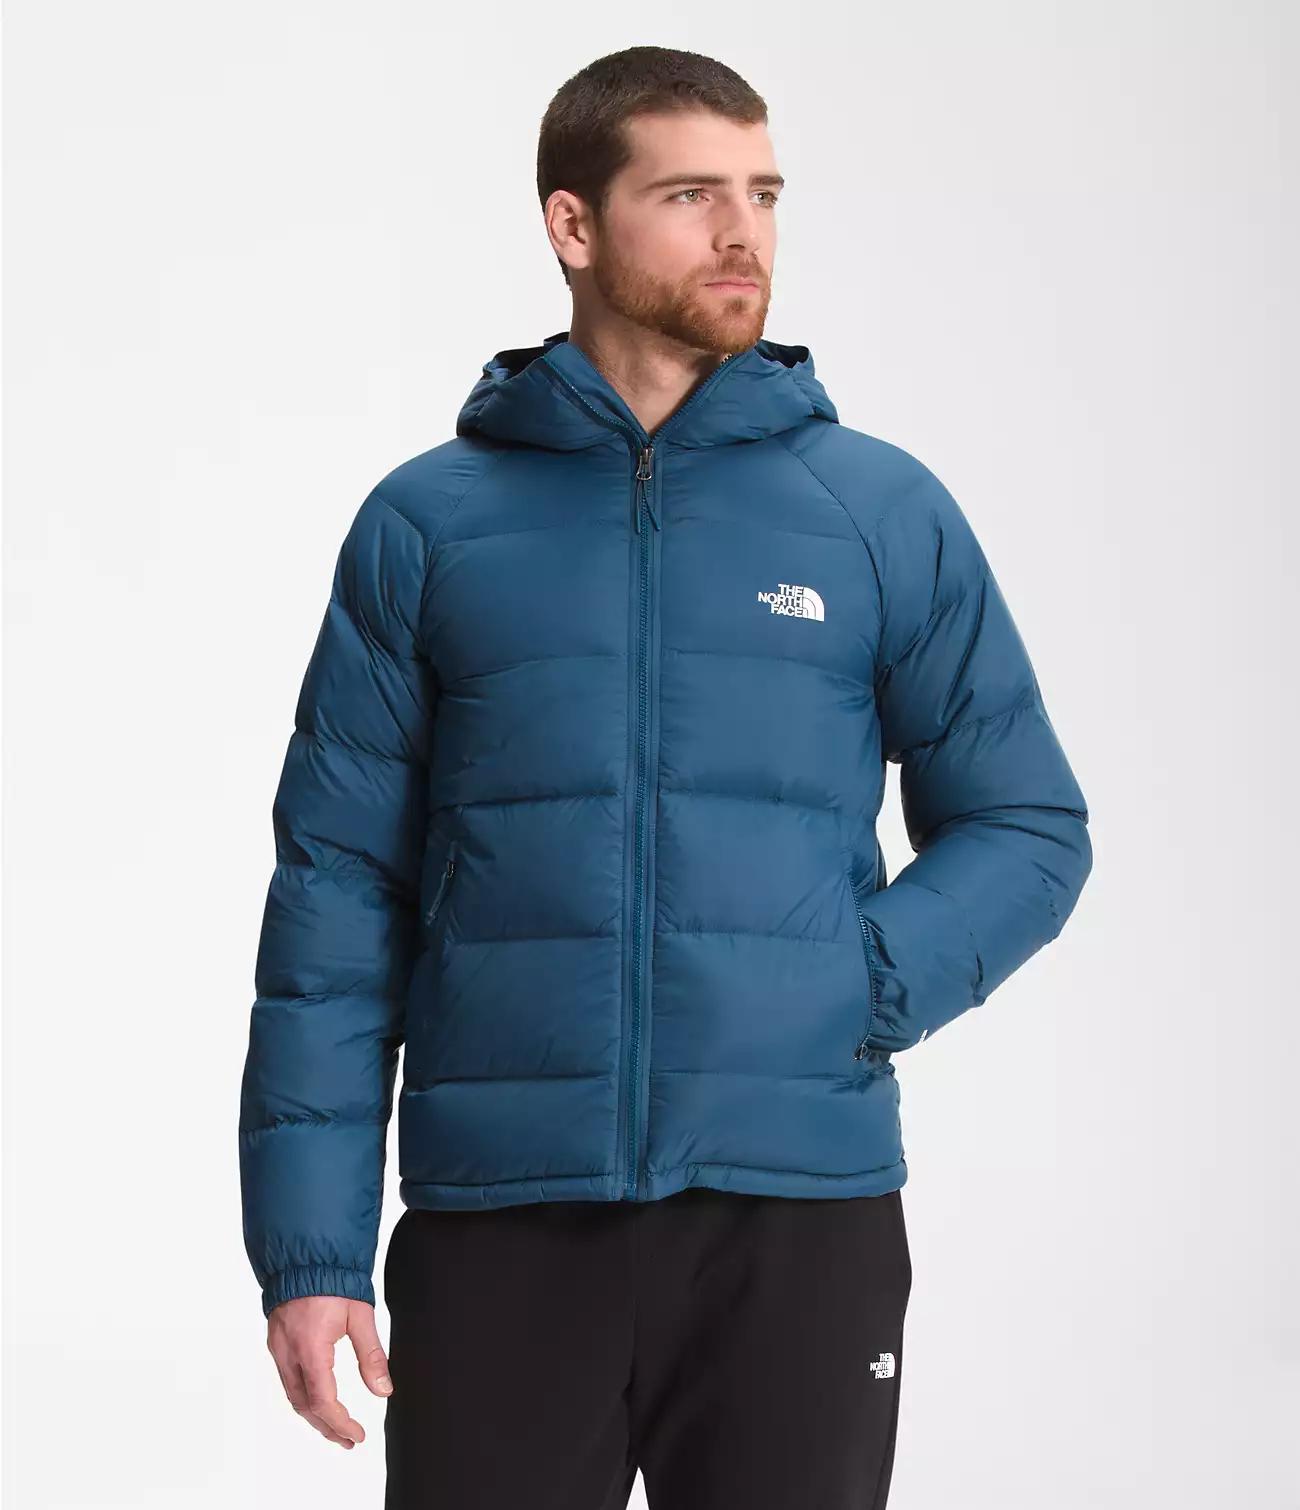 Men’s Hydrenalite Down Hoodie by THE NORTH FACE | jellibeans